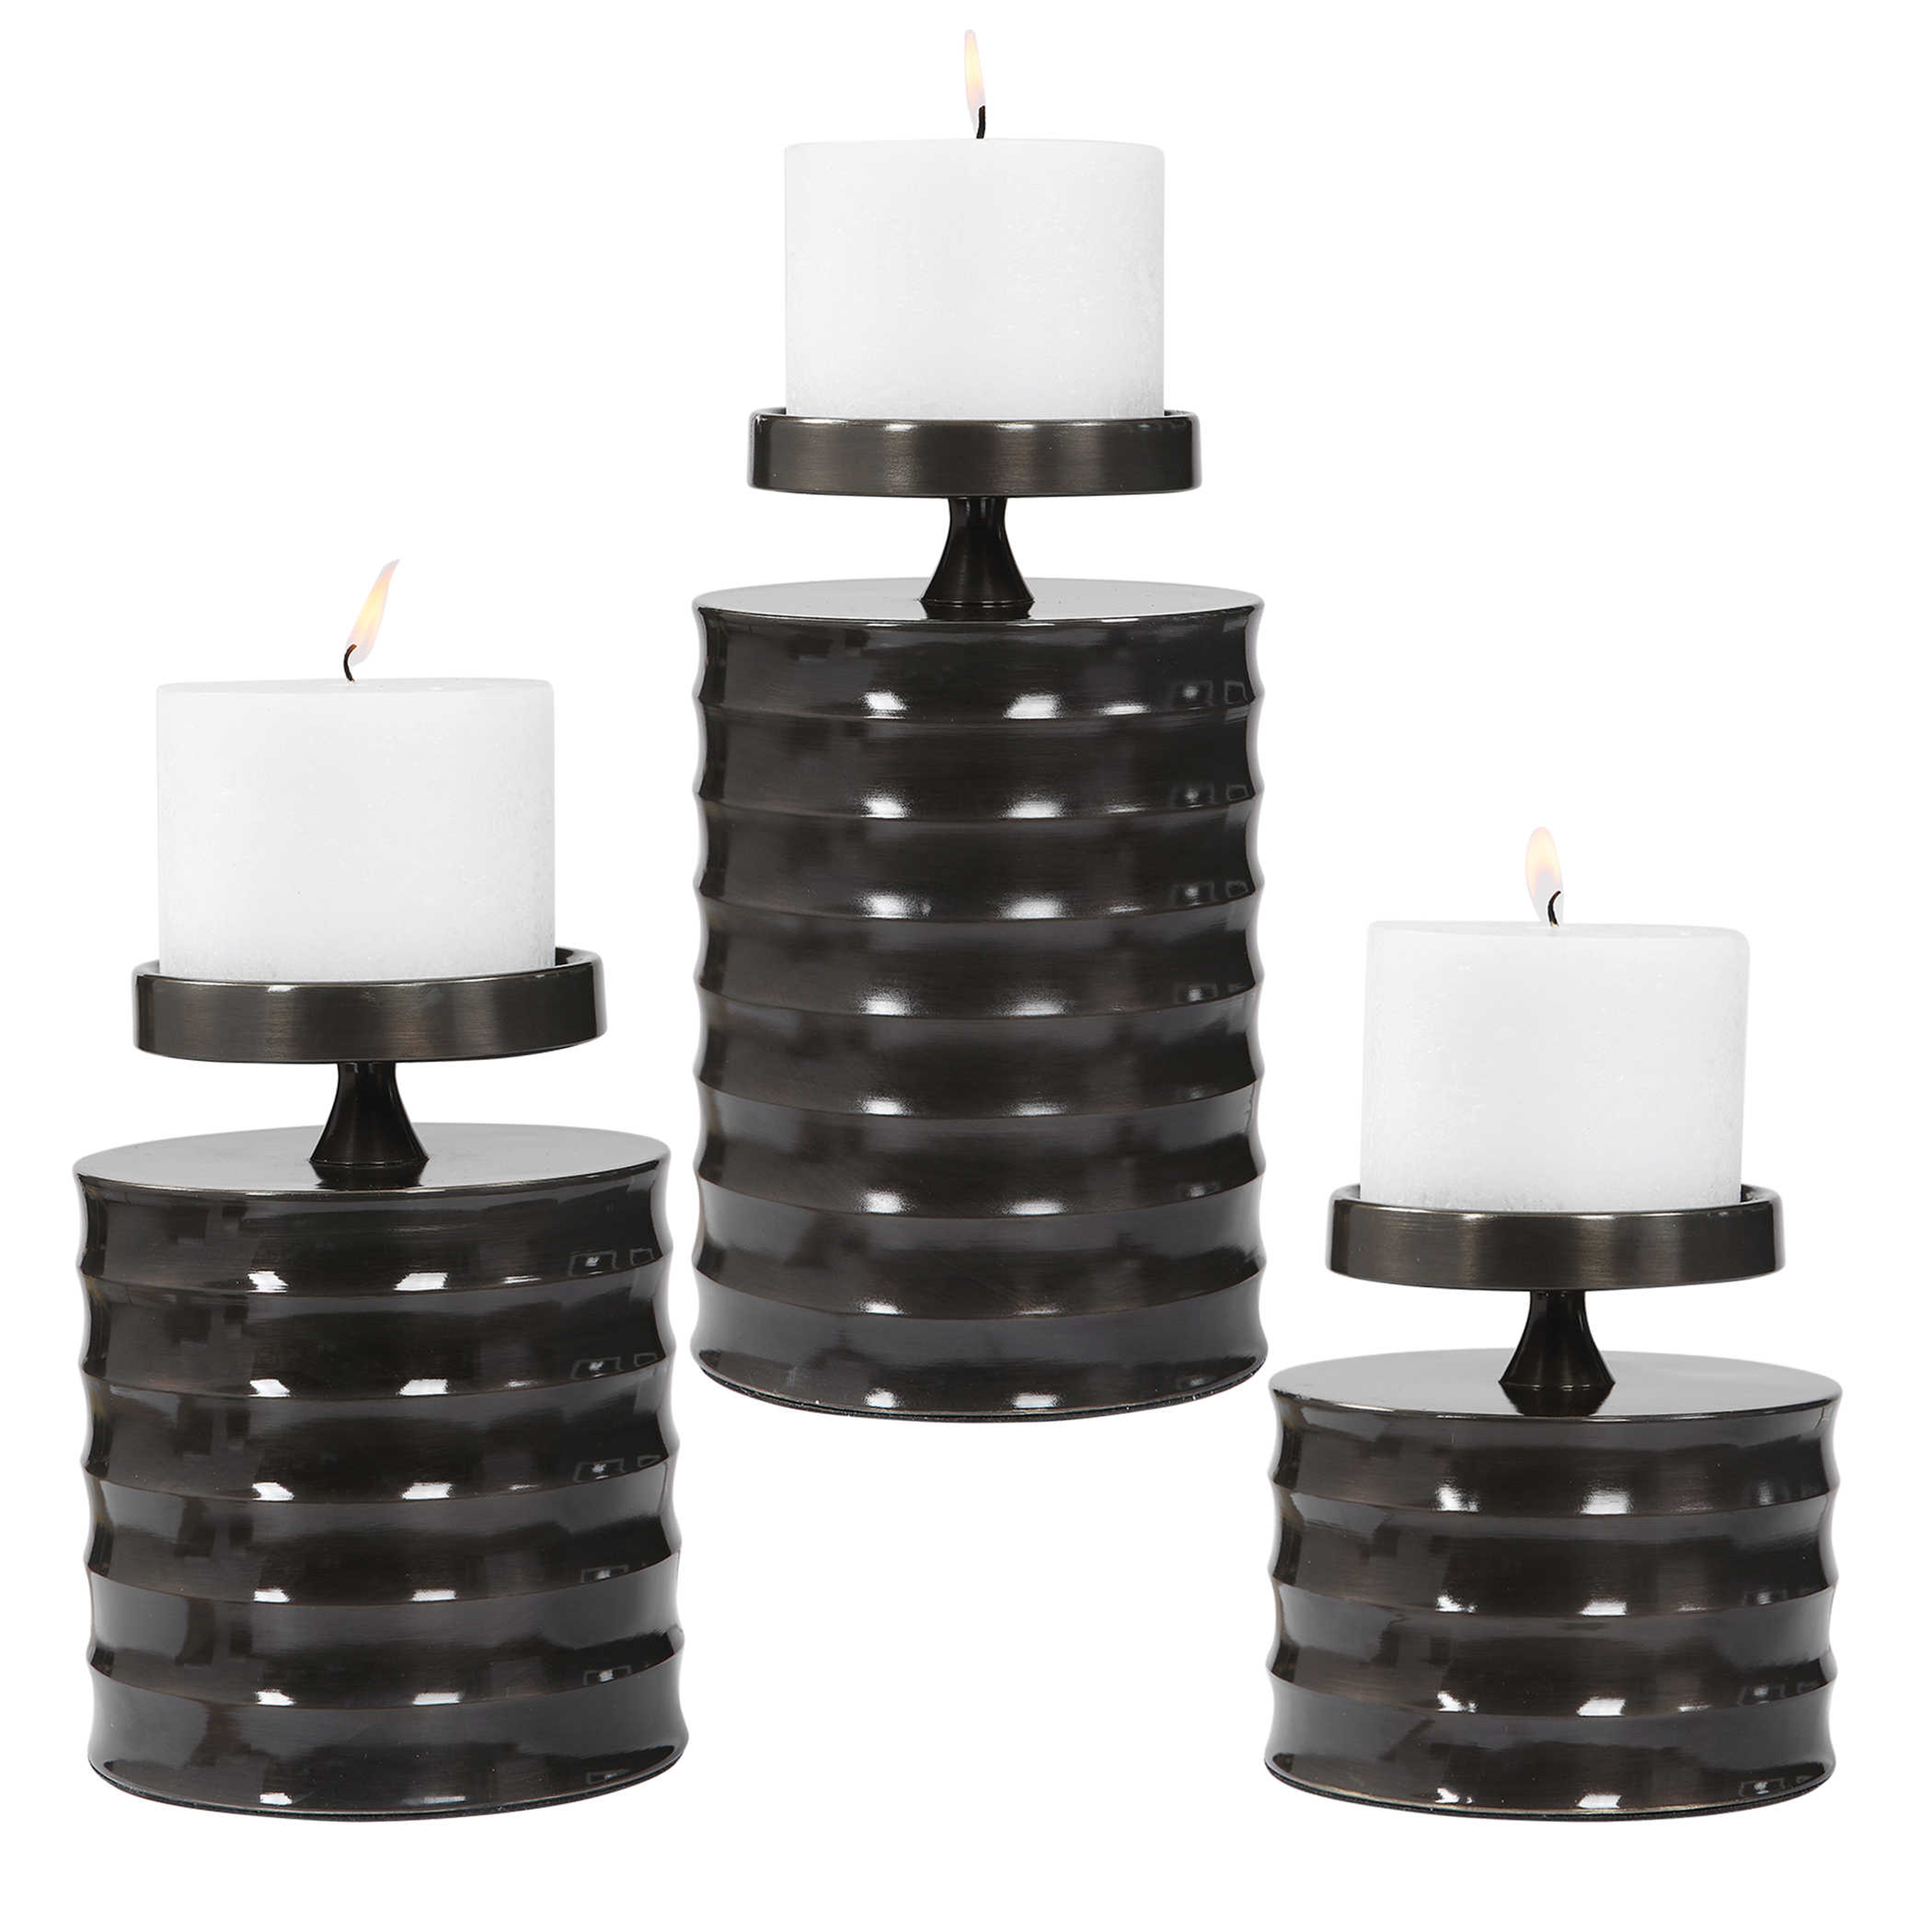 PERNILLE CANDLEHOLDERS, S/3 - Hudsonhill Foundry